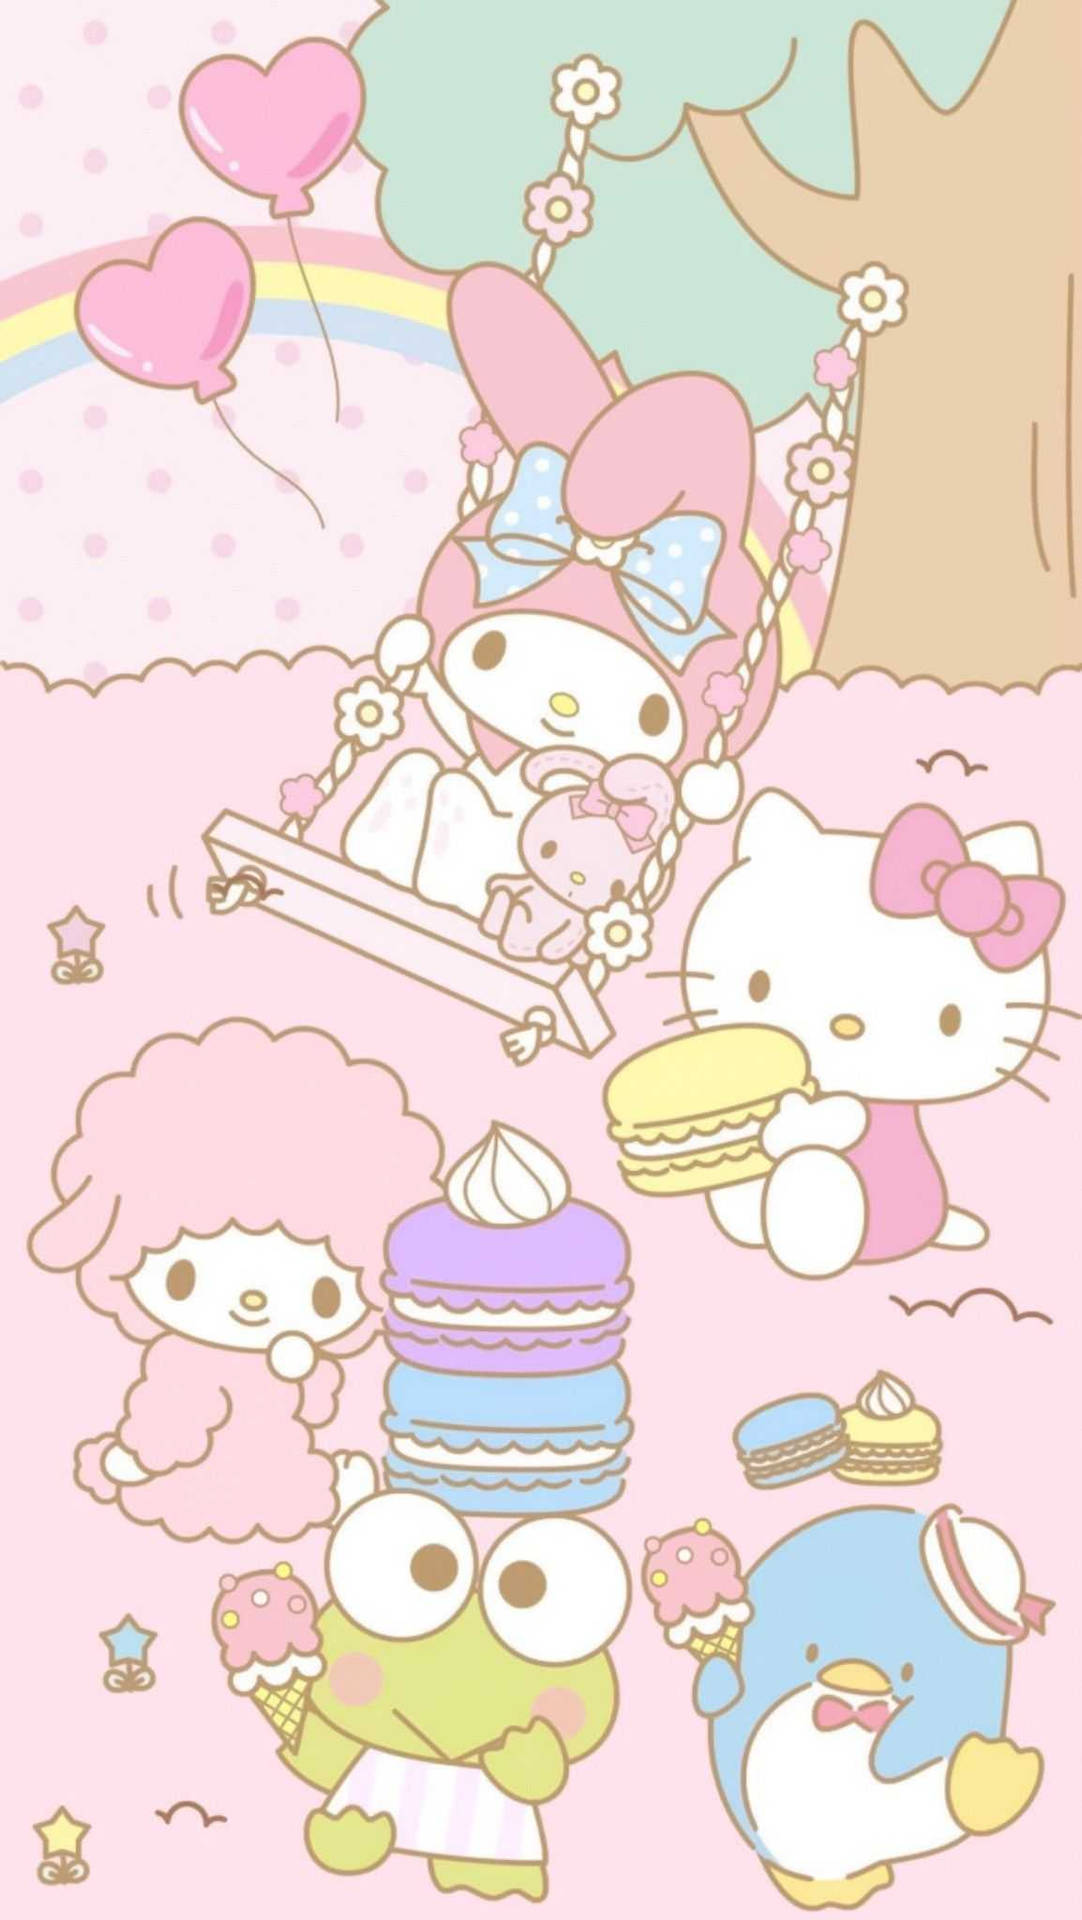 "Welcome to the Cute Sanrio World!" Wallpaper